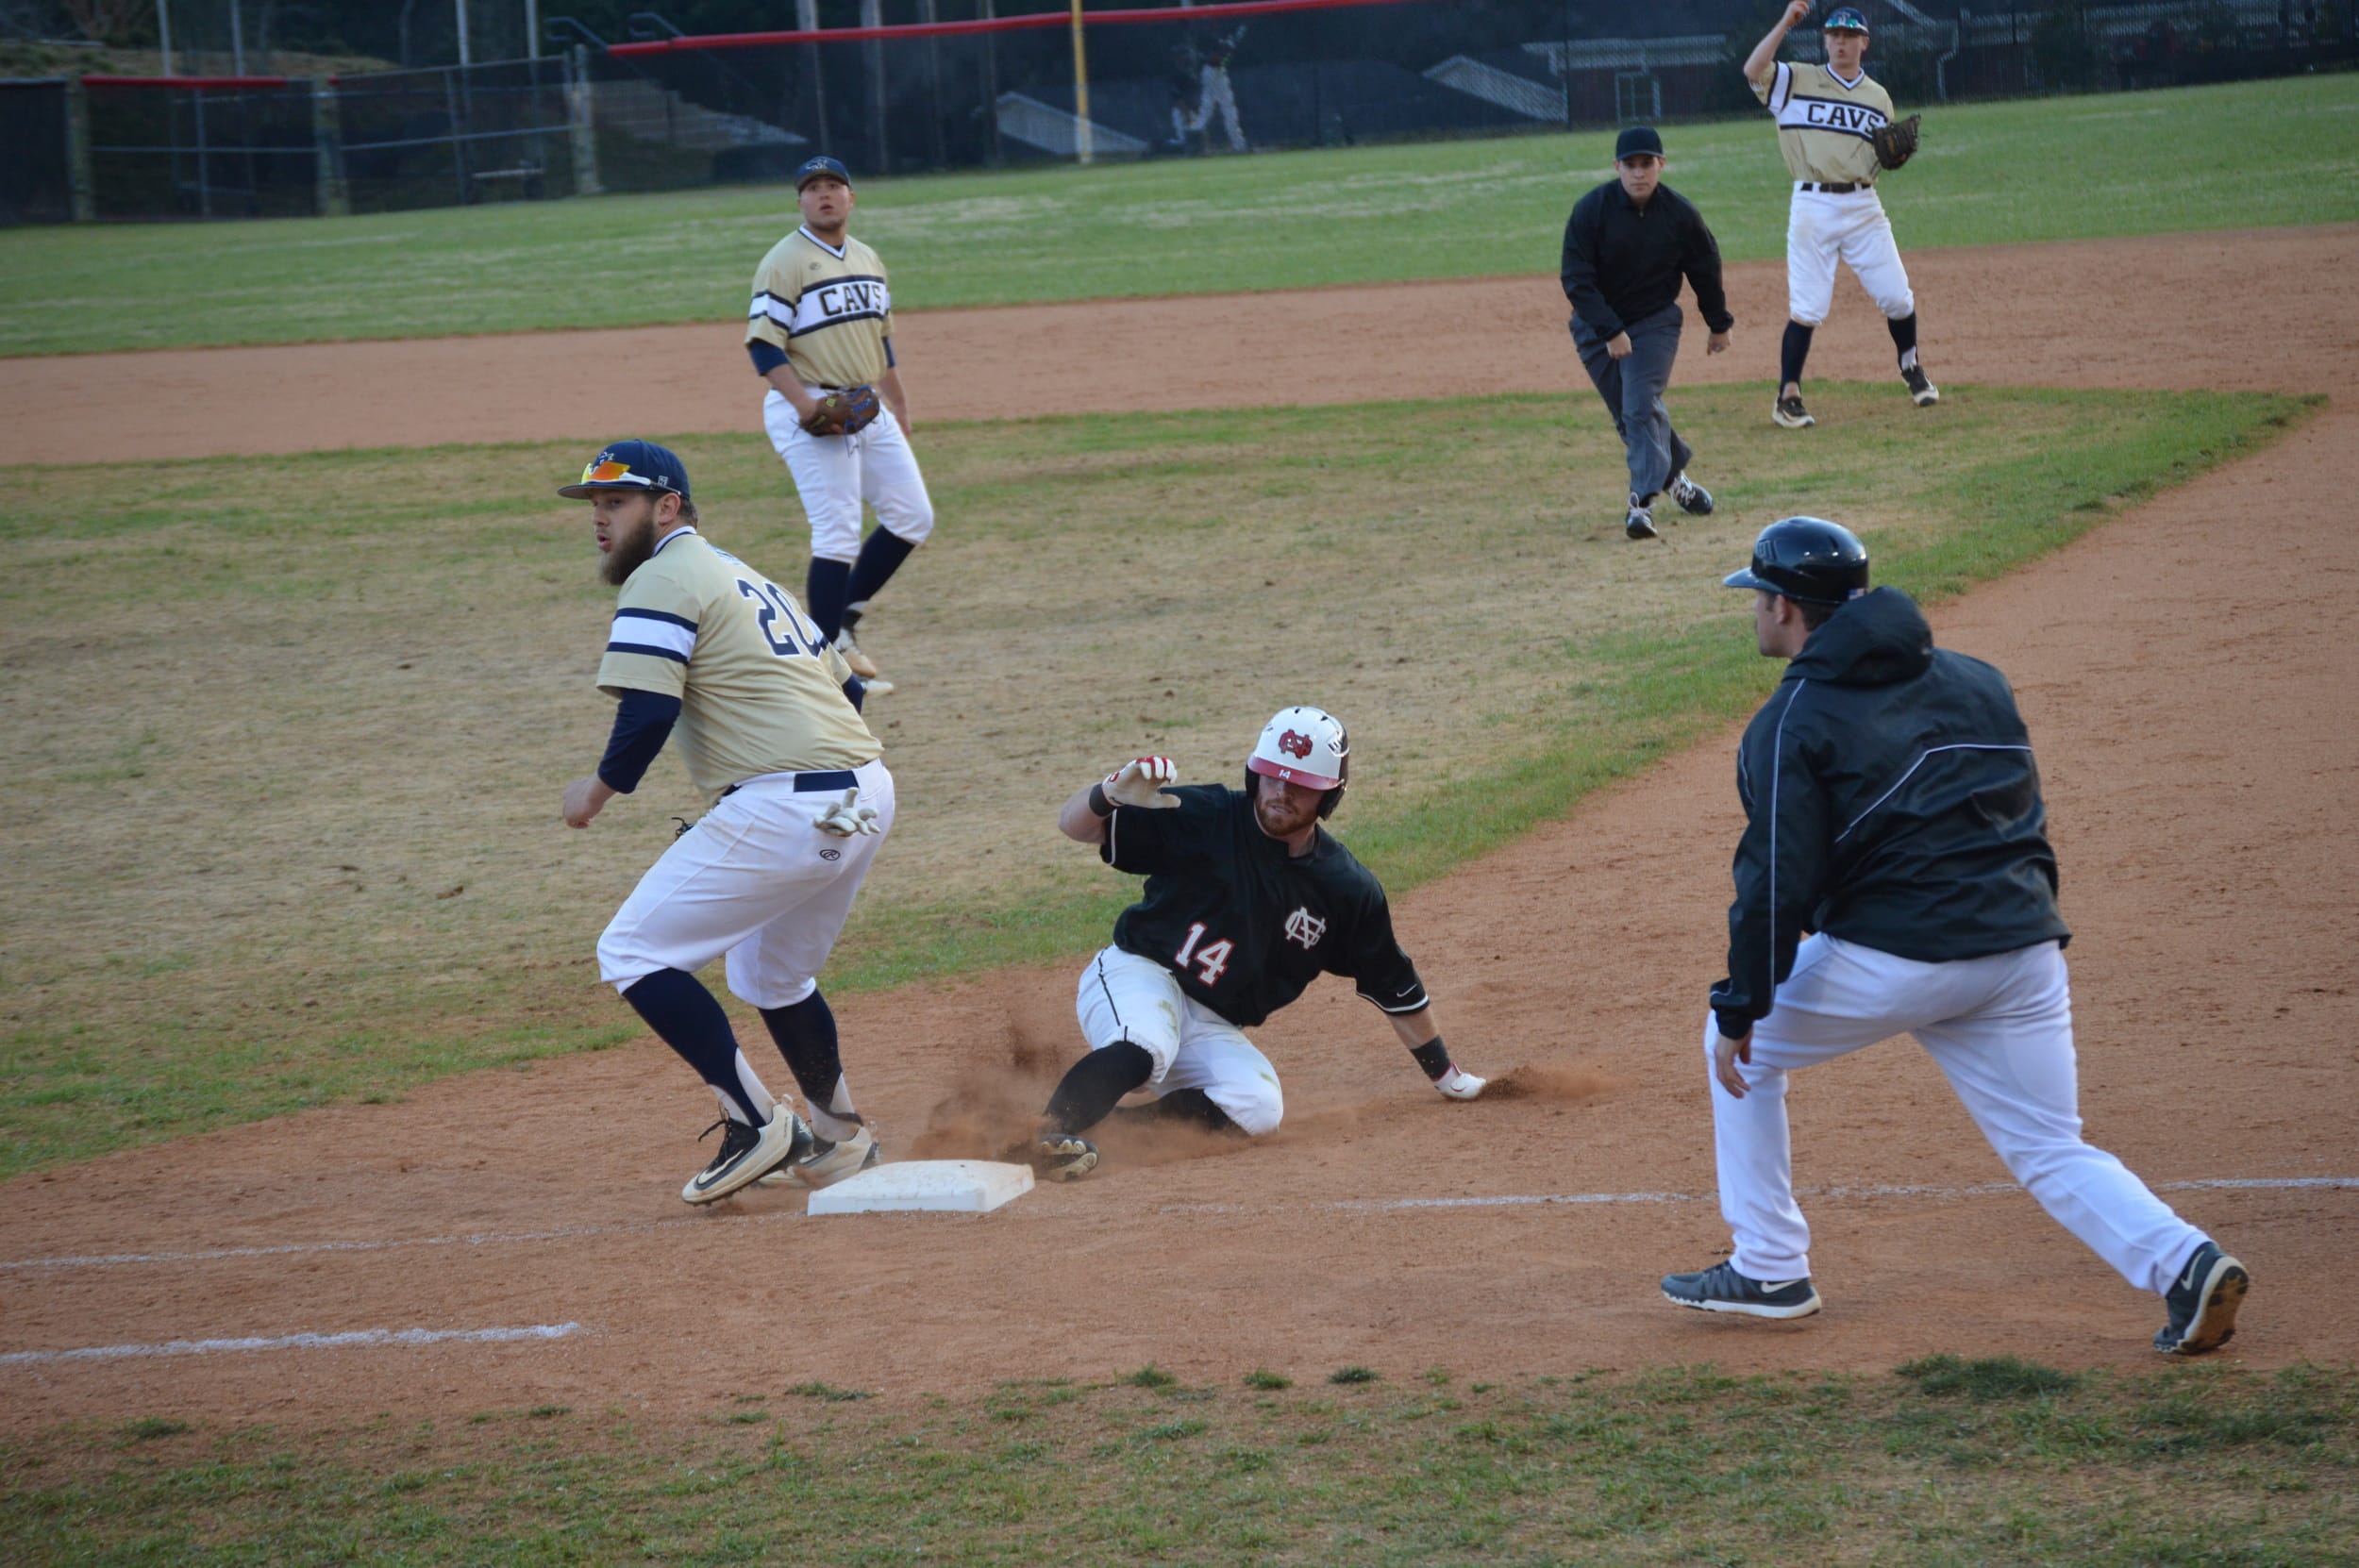 Mitchell Painter slides back to first base.